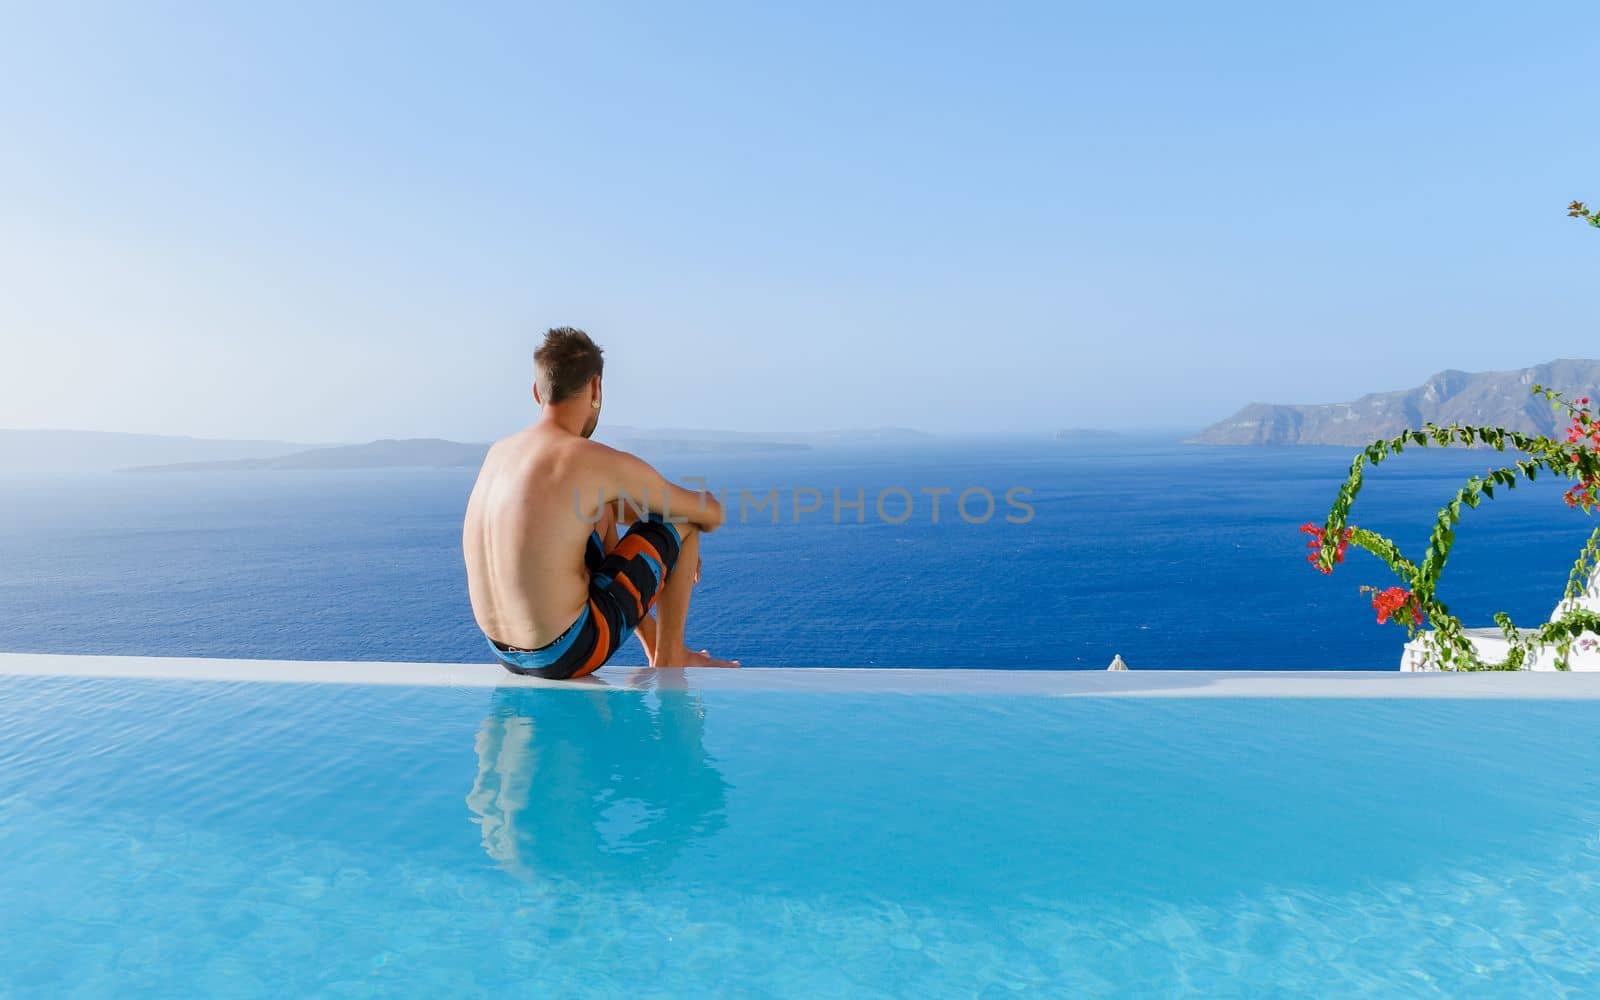 men relaxing in an infinity swimming pool during vacation at Santorini, swimming pool looking out over the Caldera ocean of Santorini, Oia Greece, Greek Island Aegean Cyclades luxury vacation.